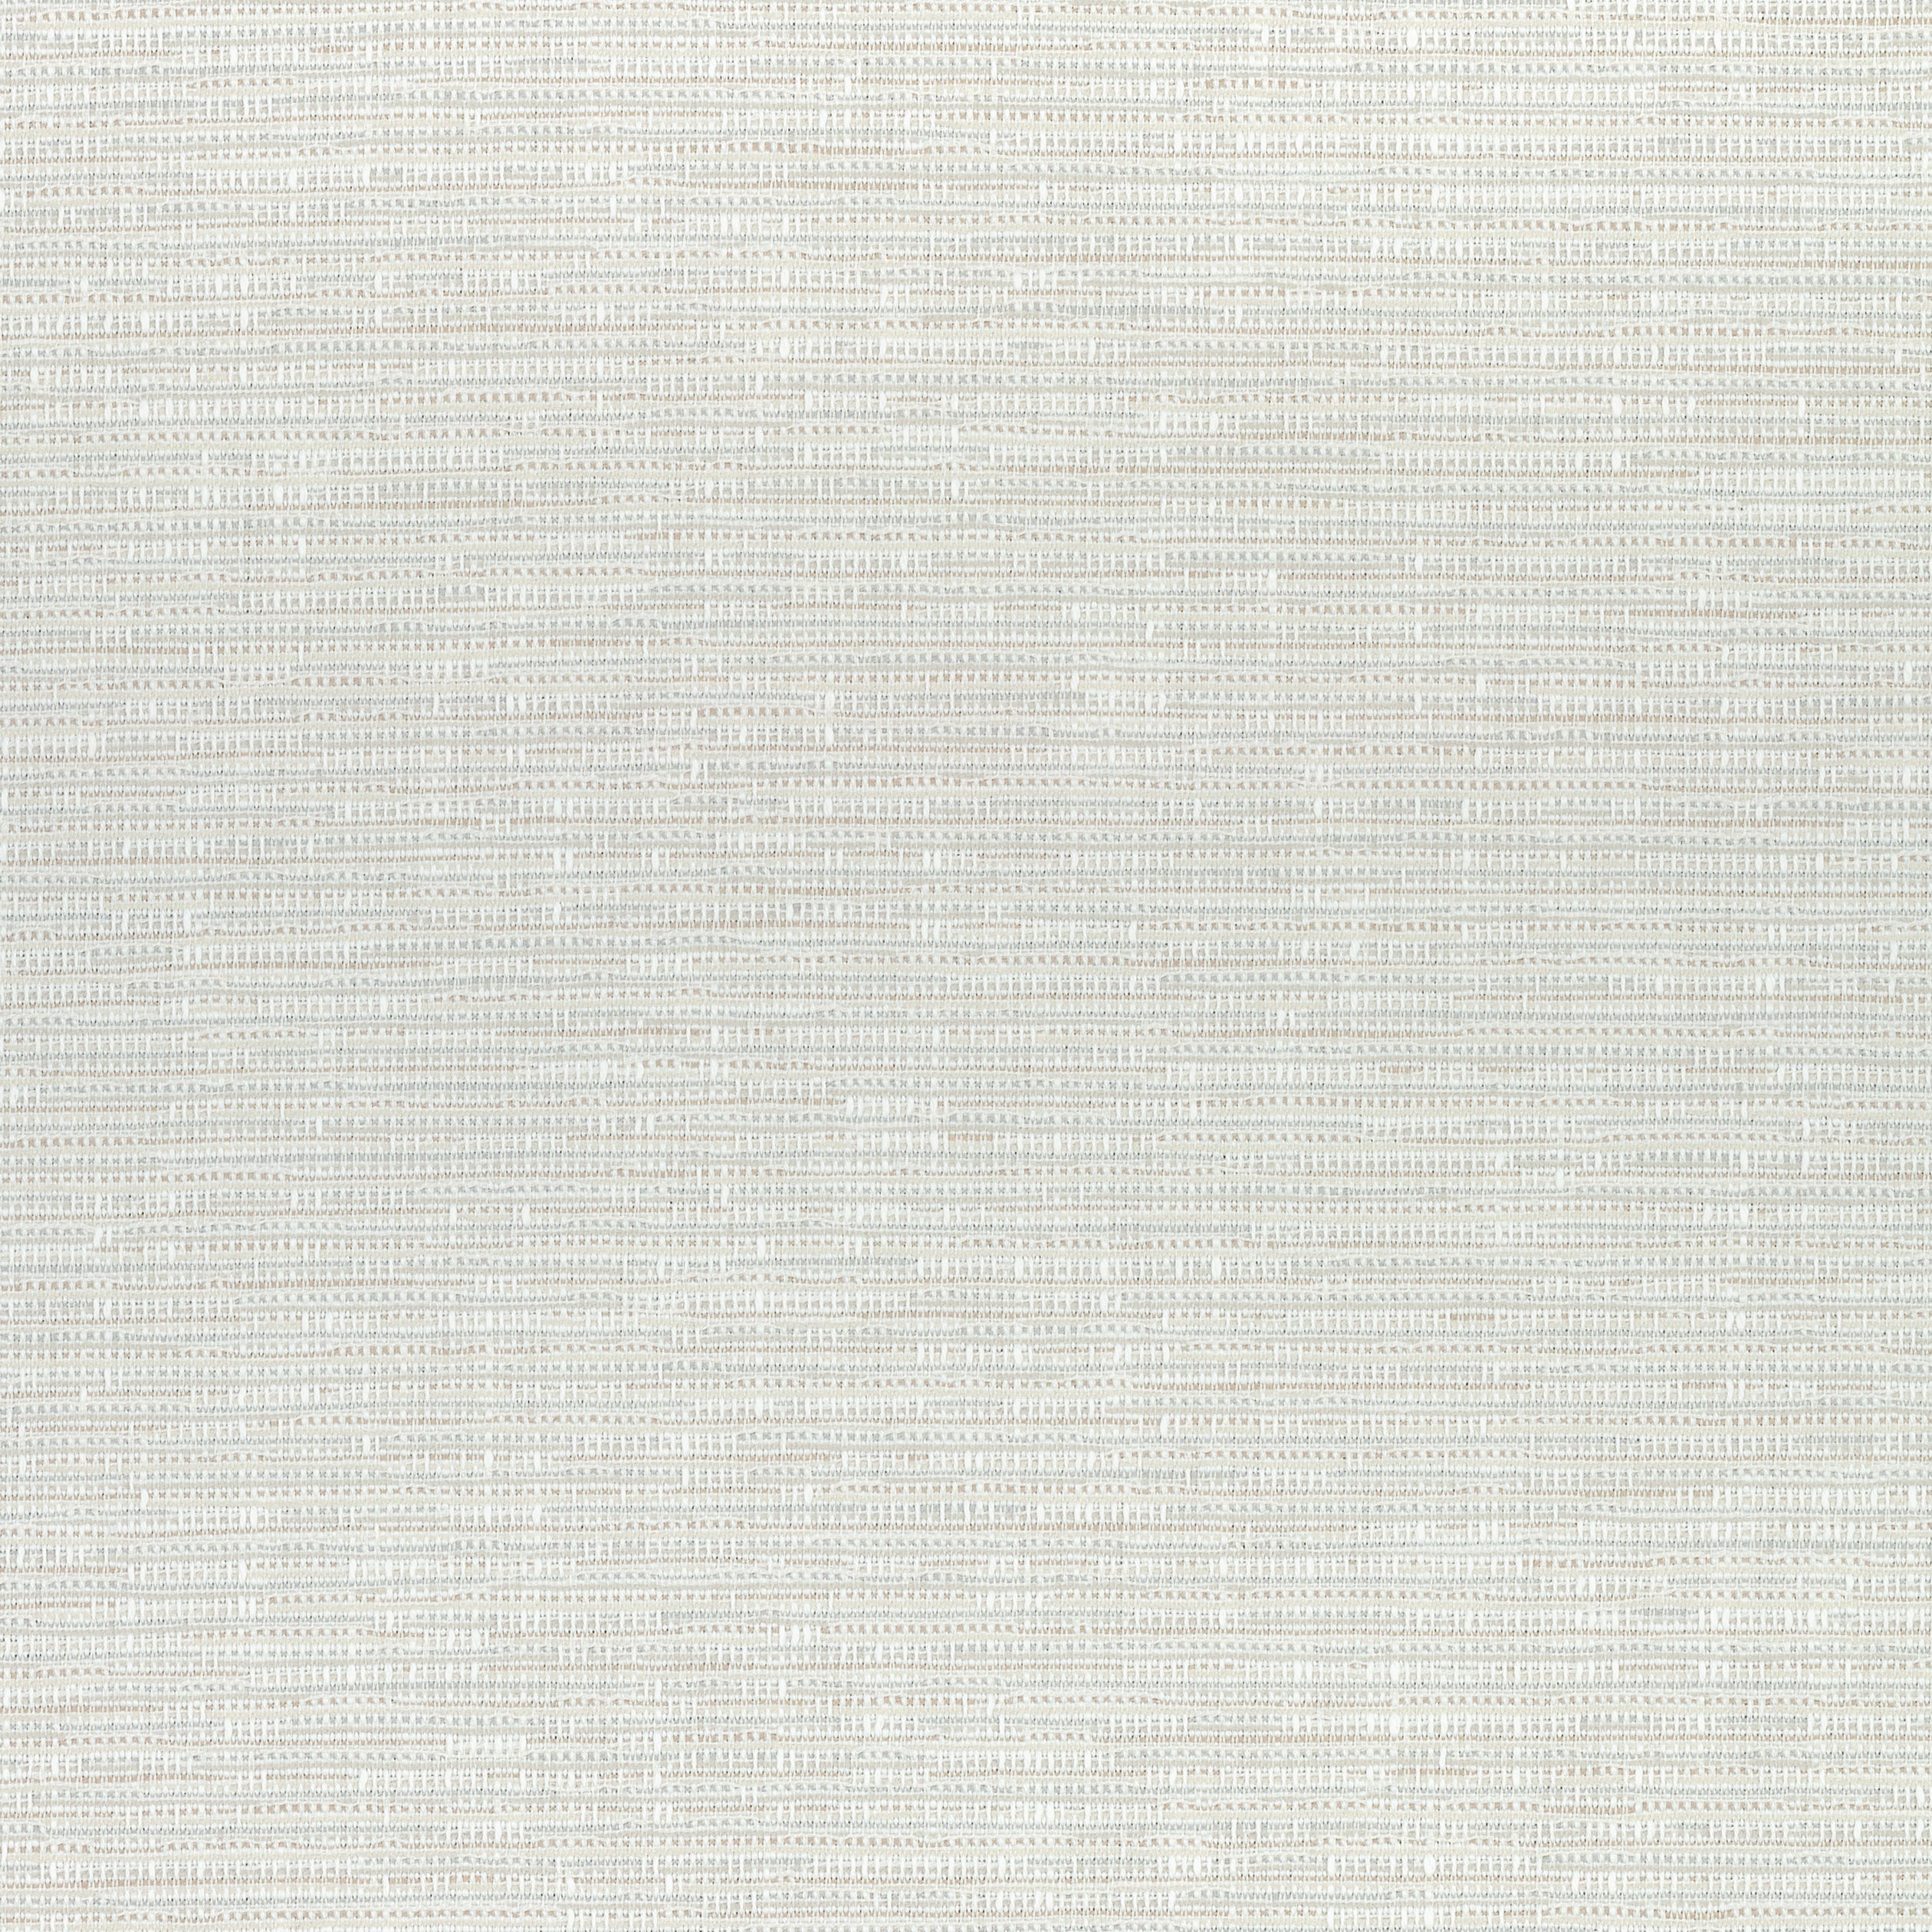 Cadence fabric in oyster color - pattern number W74047 - by Thibaut in the Cadence collection